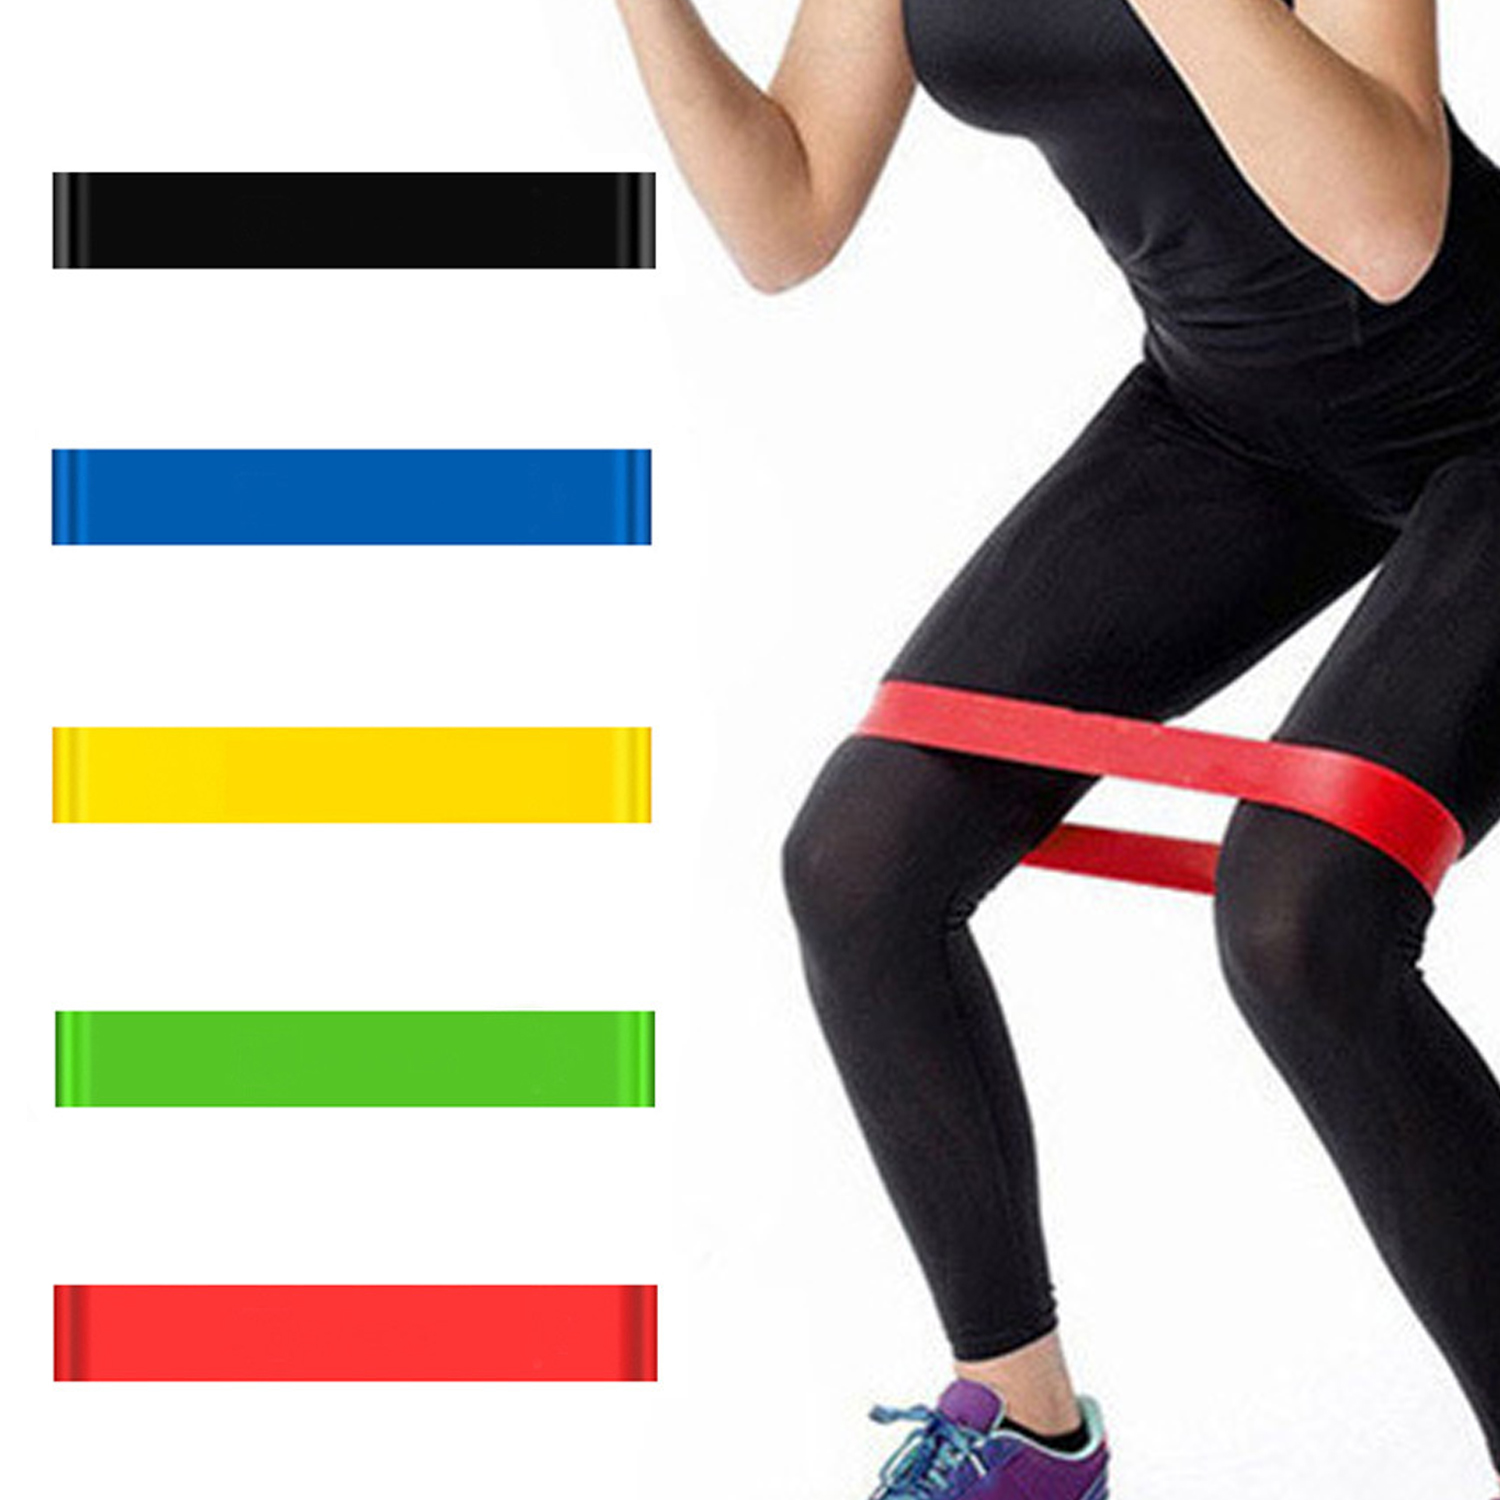 5 Pcs Ring Shape Latex Resistance Bands Yoga Gym Strength Elastic Training Rubber Loops Bands